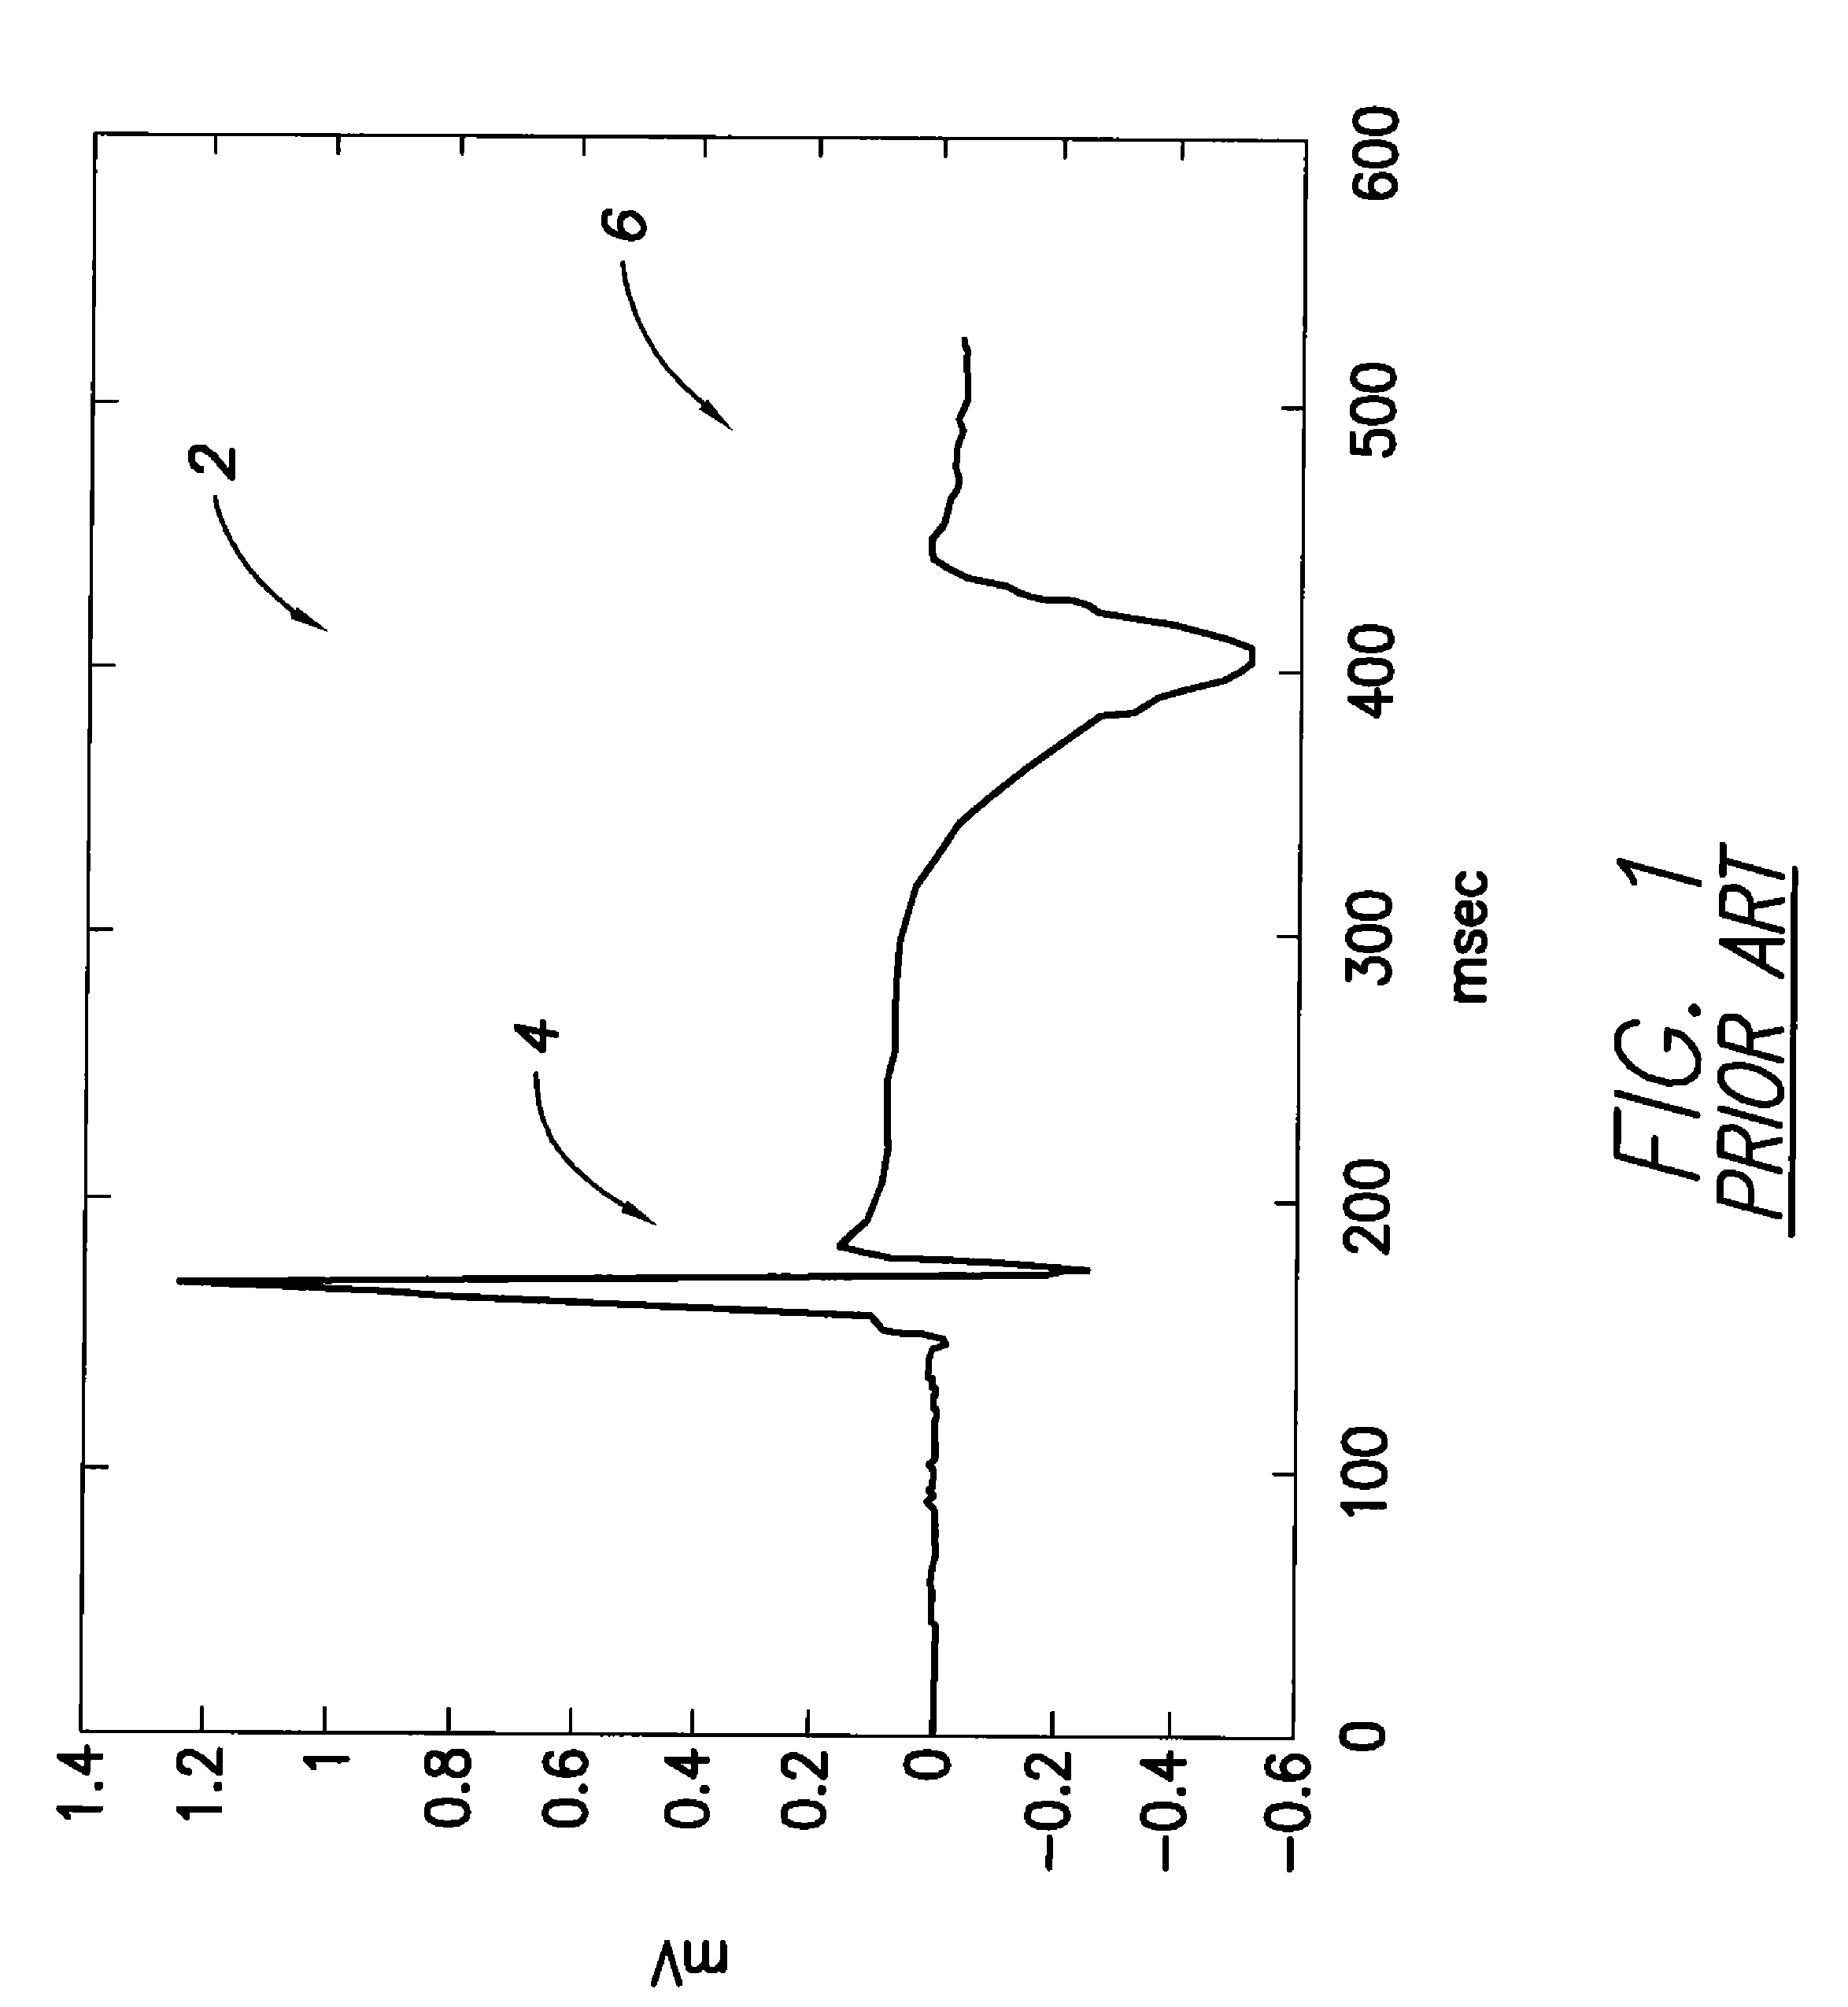 Systems and methods for employing an FFT to distinguish R-waves from T-waves using an implantable medical device